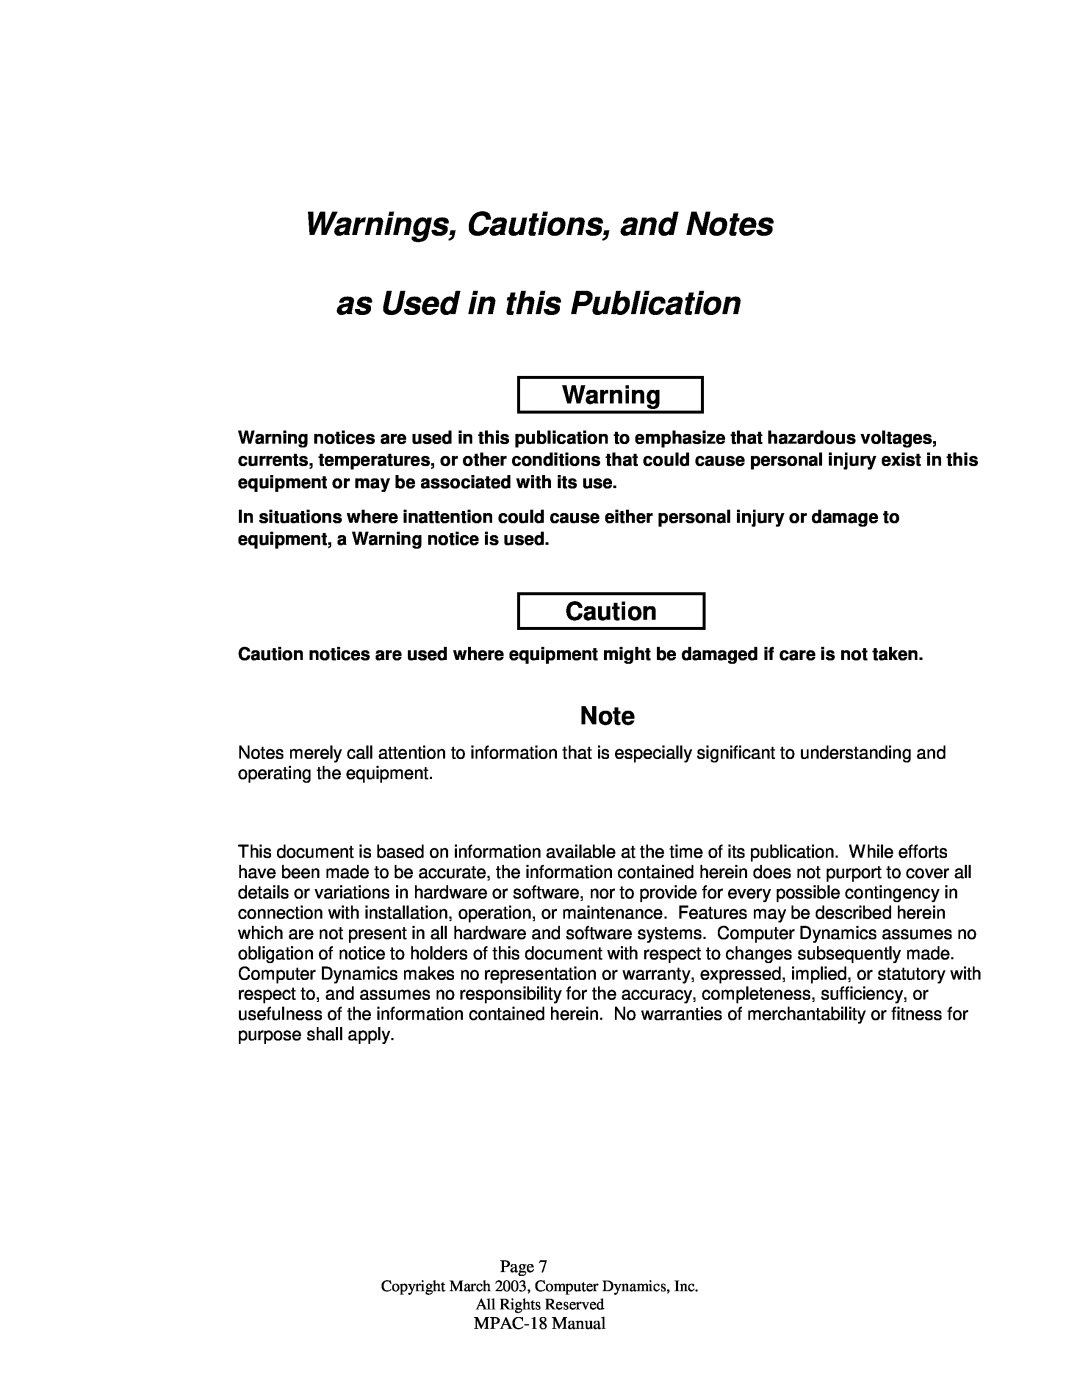 Compaq MPAC-18 manual Warnings, Cautions, and Notes as Used in this Publication 